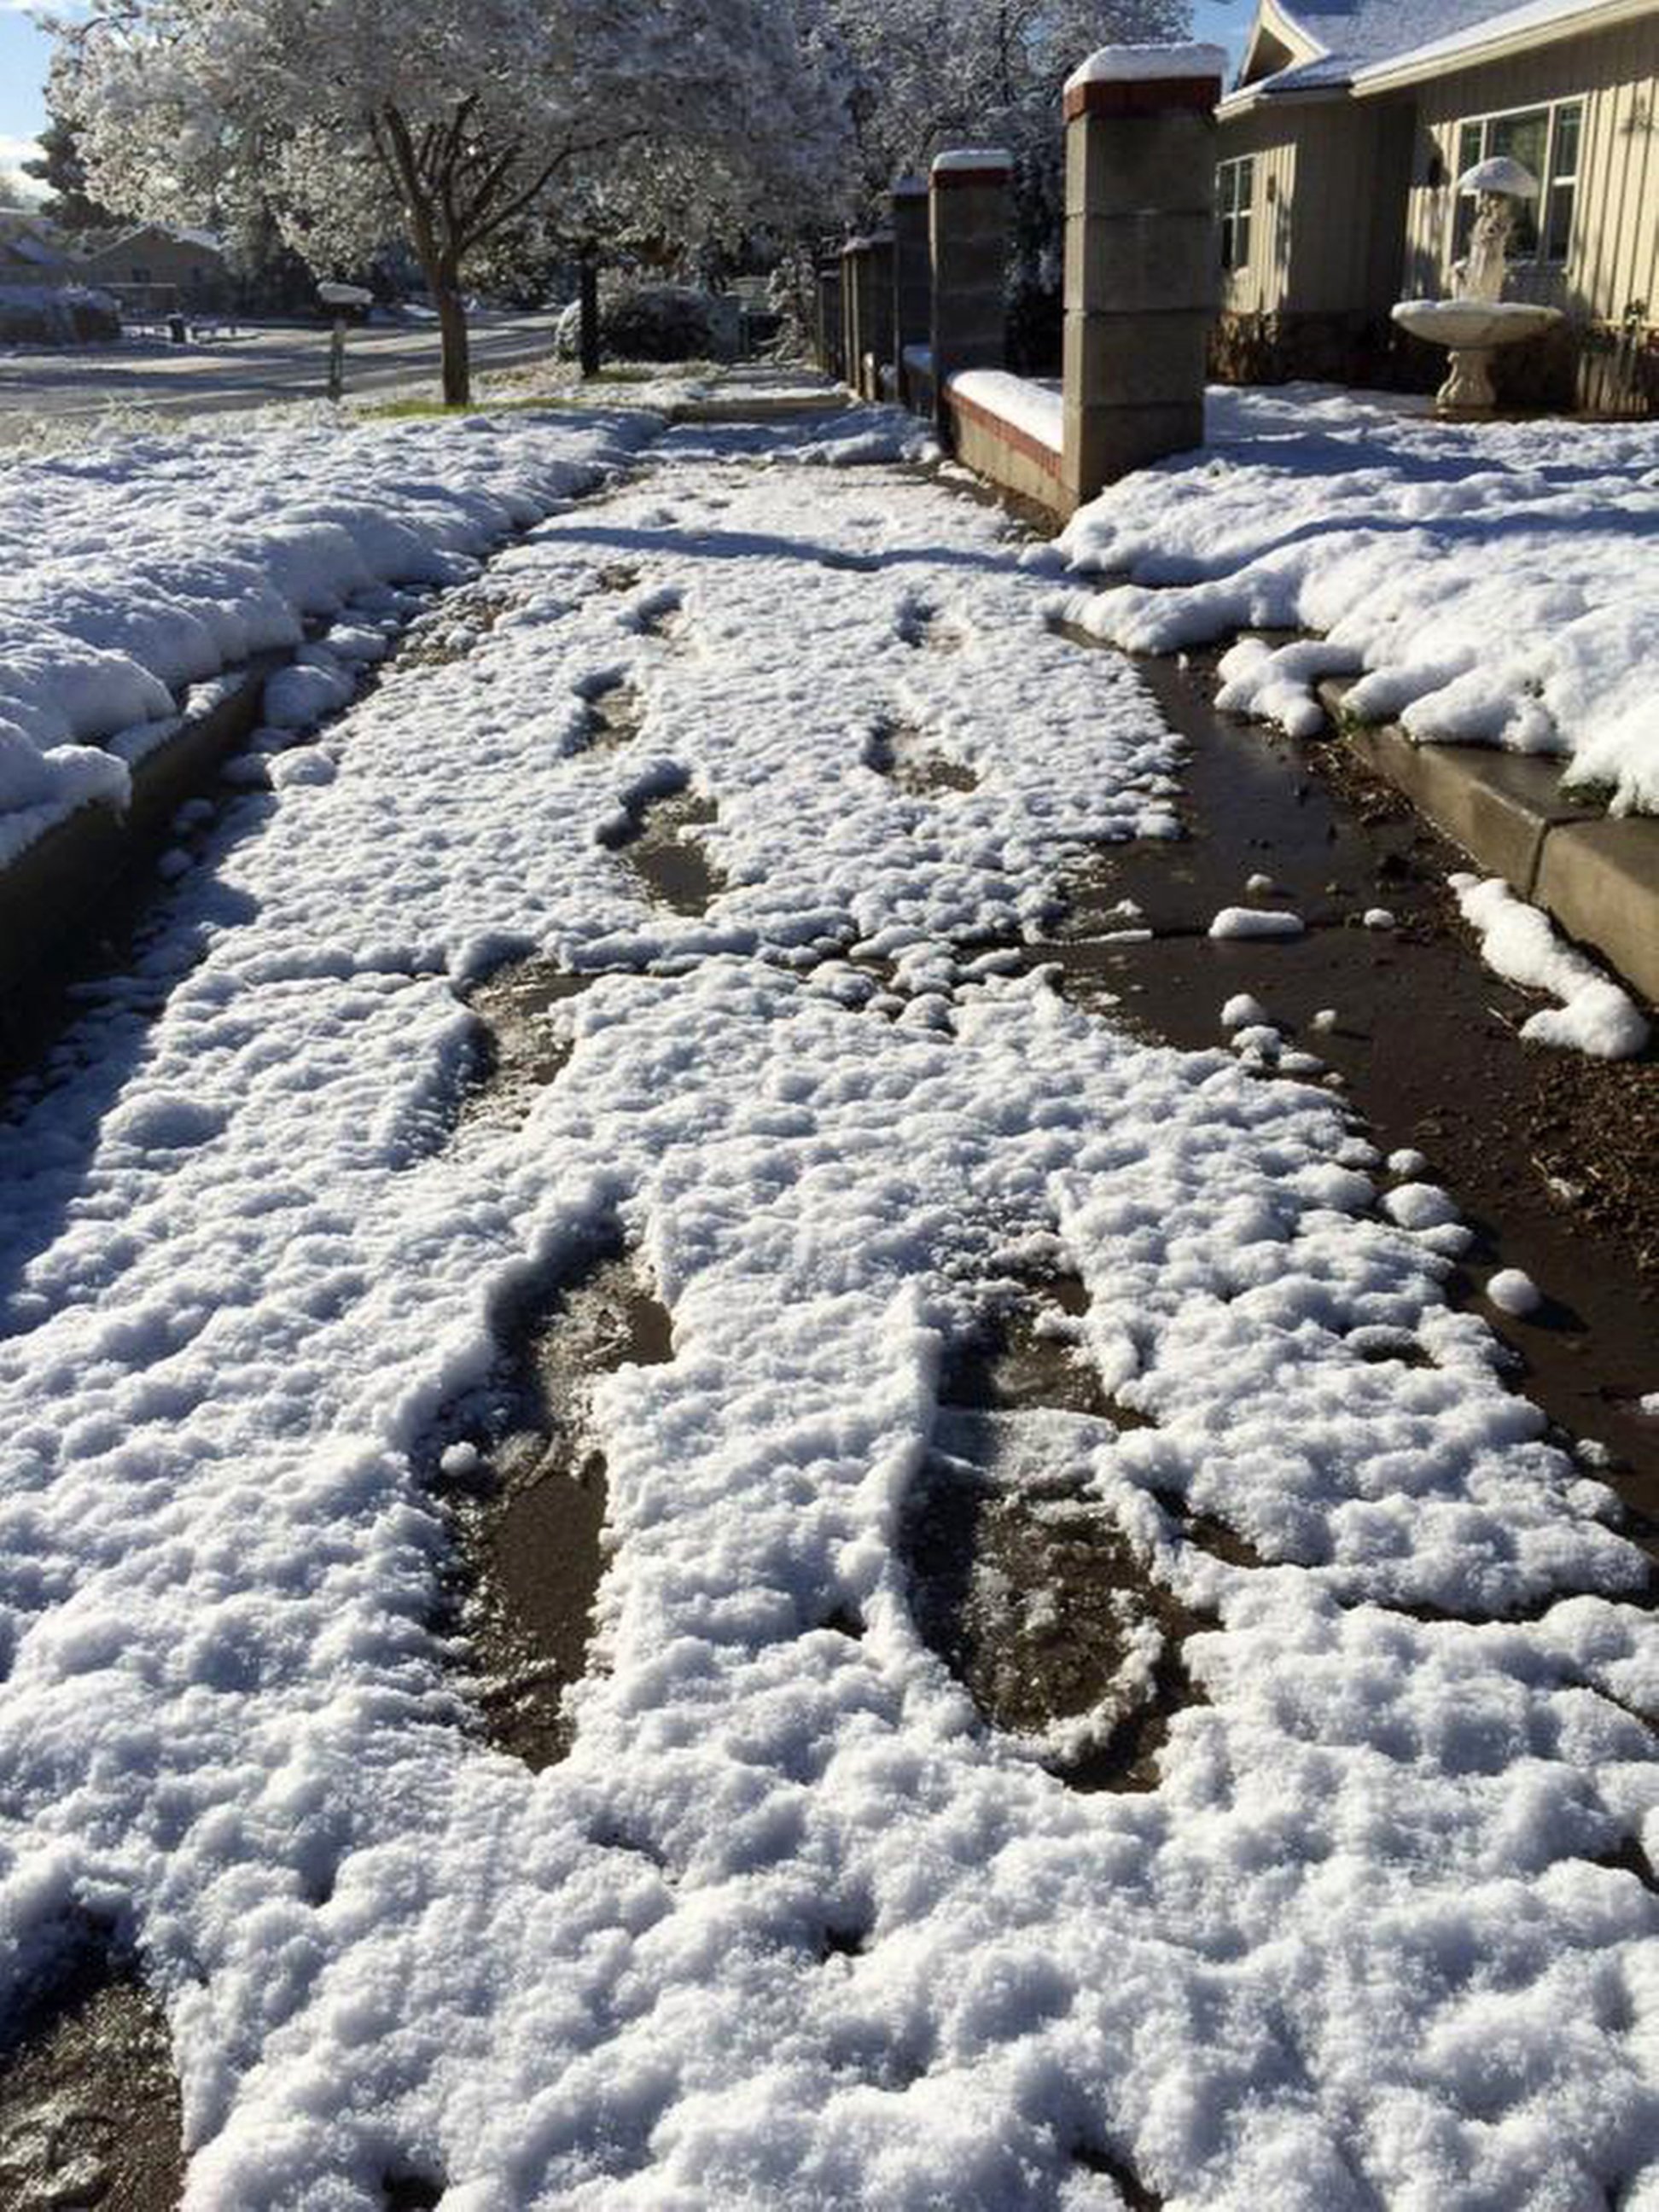 PHOTO: Footprints are left in the snow along a neighborhood street following last night's winter storm in Yucaipa, Calif., Dec. 31, 2014.